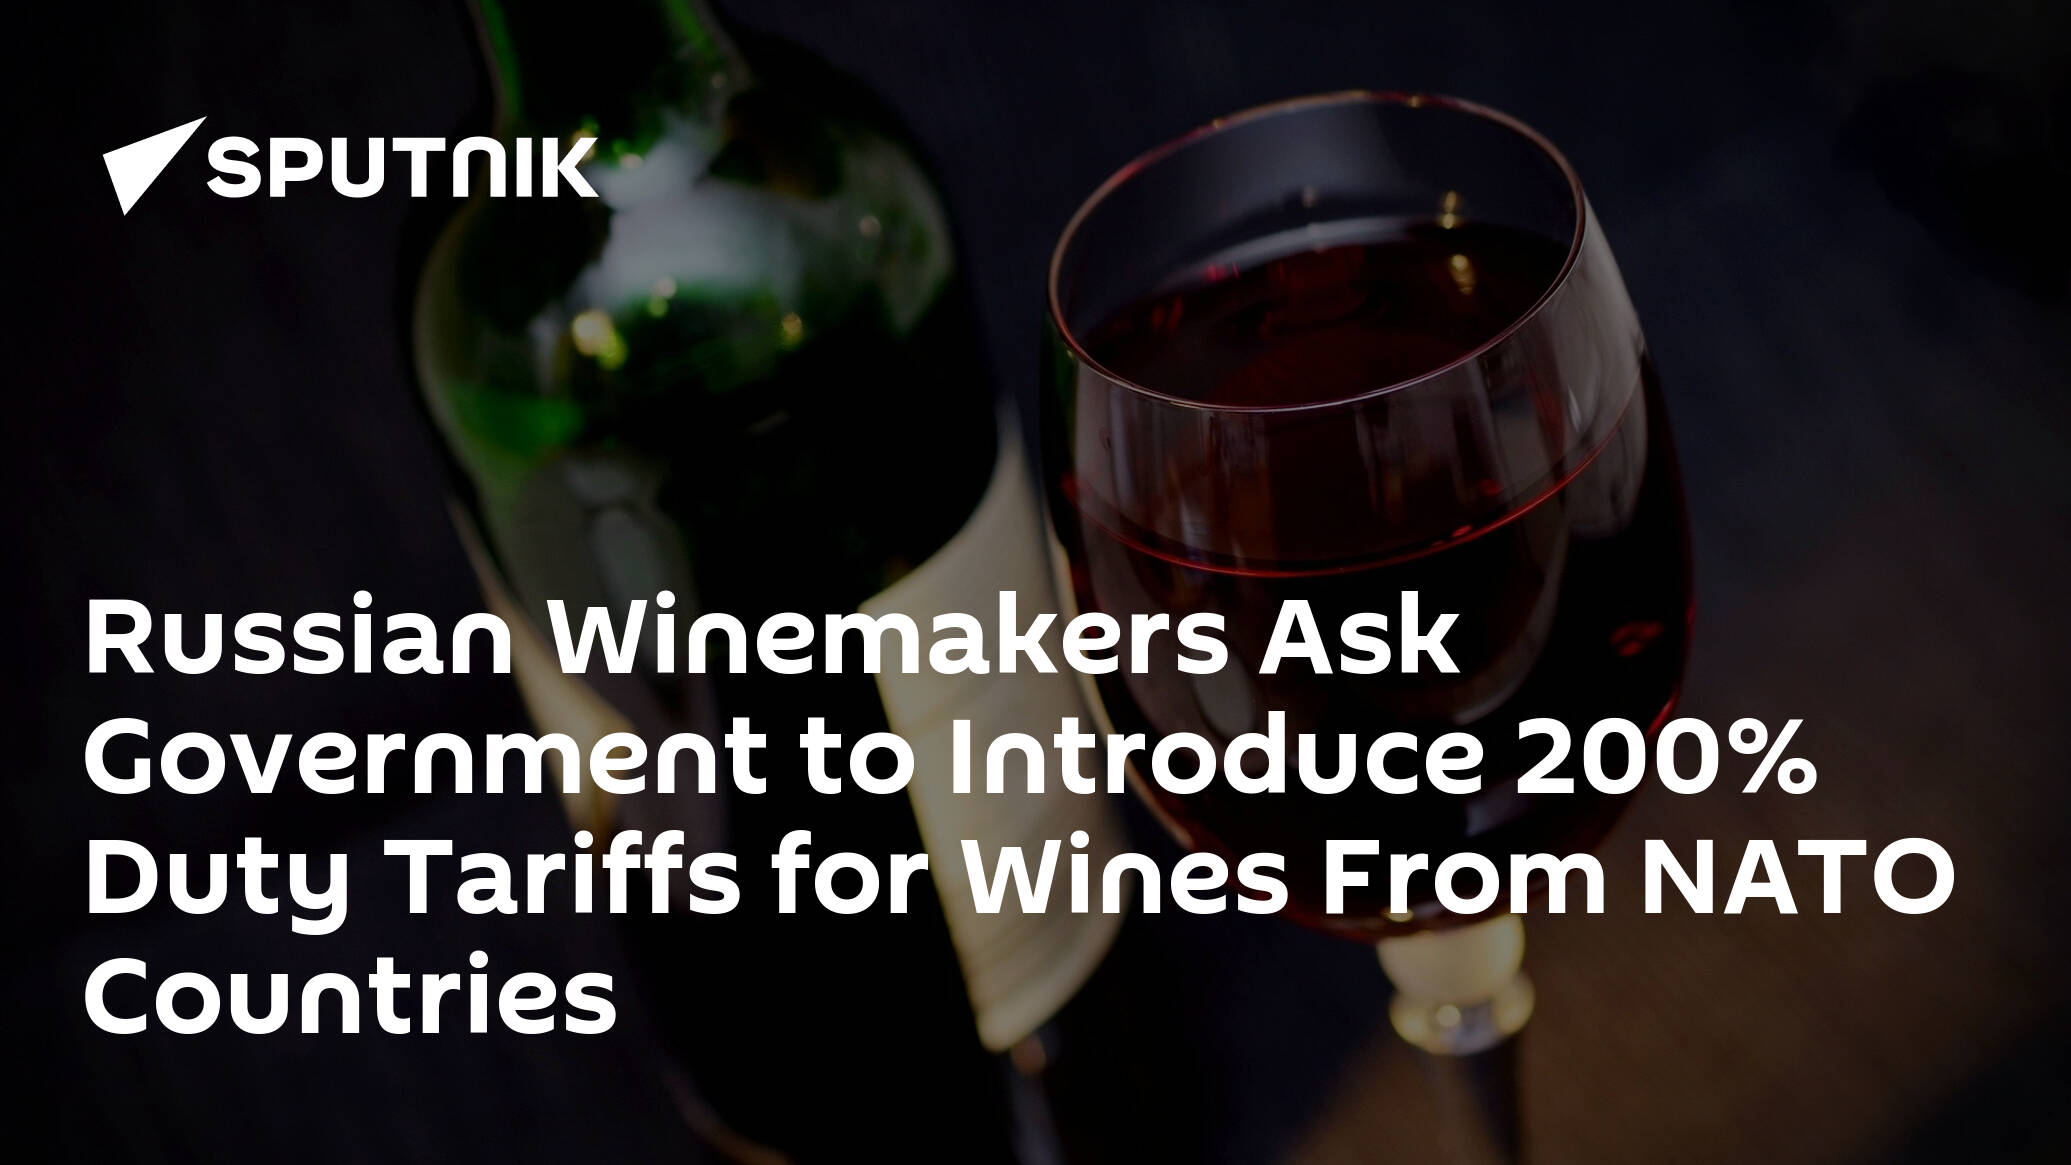 Russian Winemakers Ask Government to Introduce 200% Duty Tariffs for Wines From NATO Countries